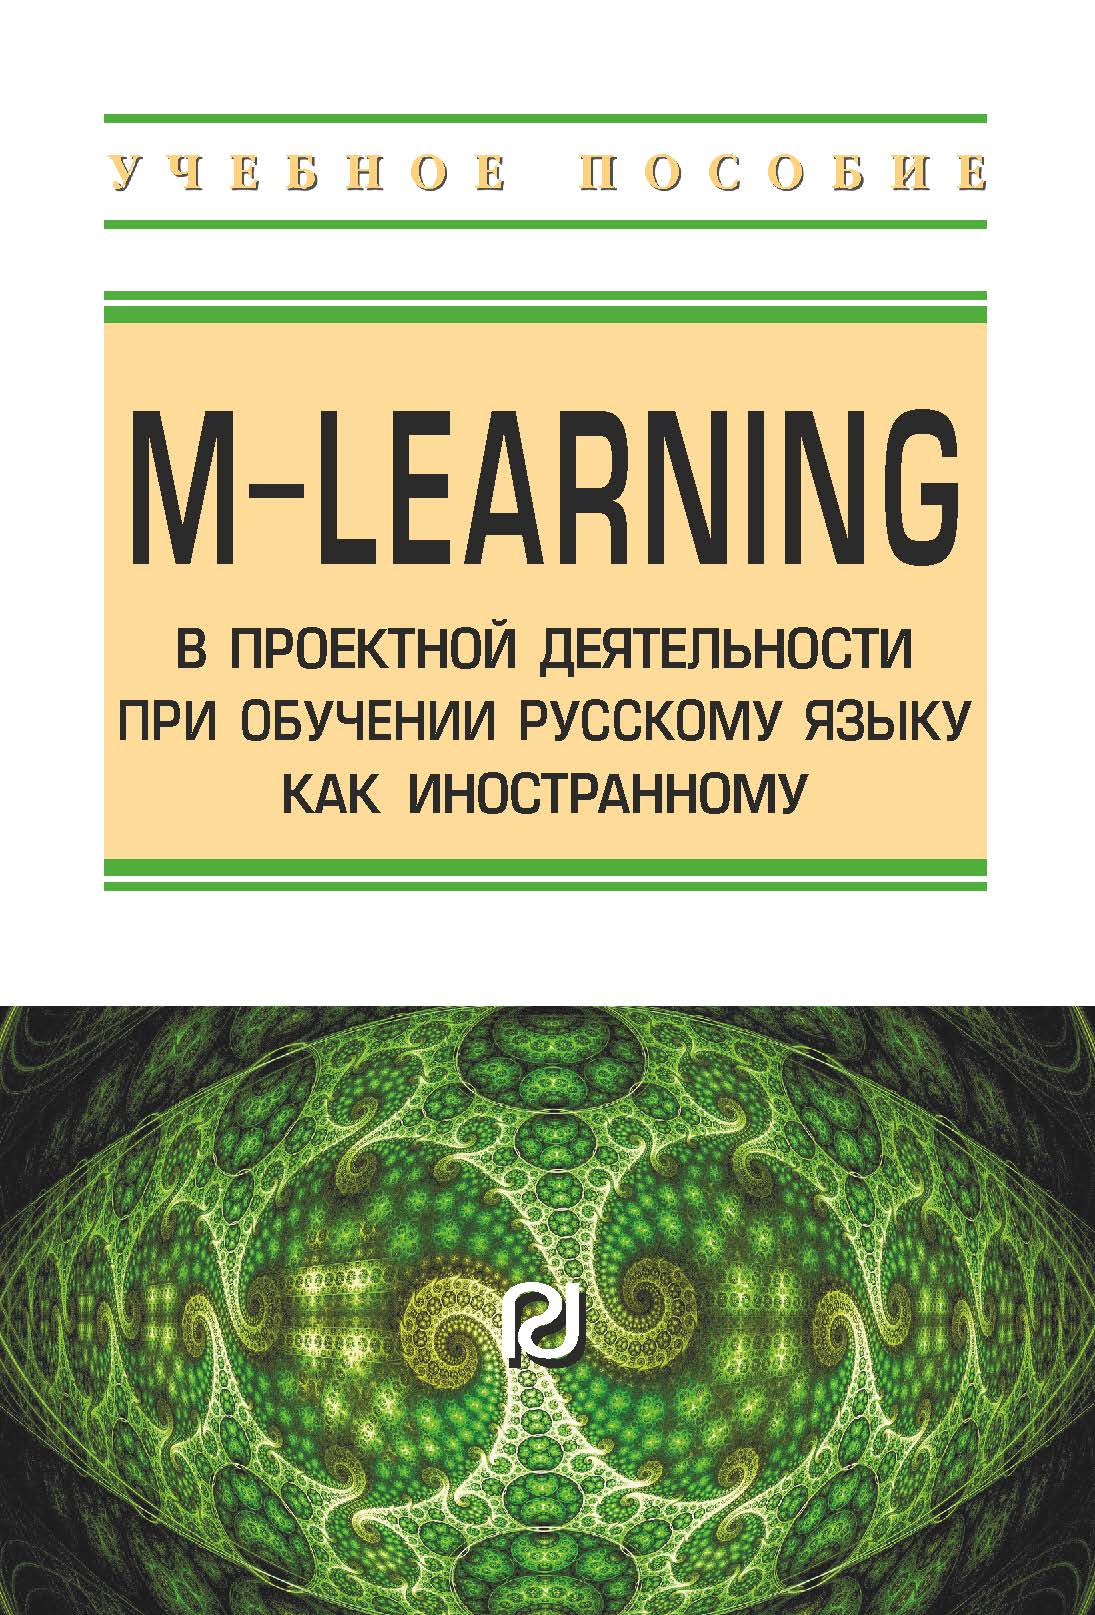                         M-learning in project activities when teaching Russian as a foreign language
            